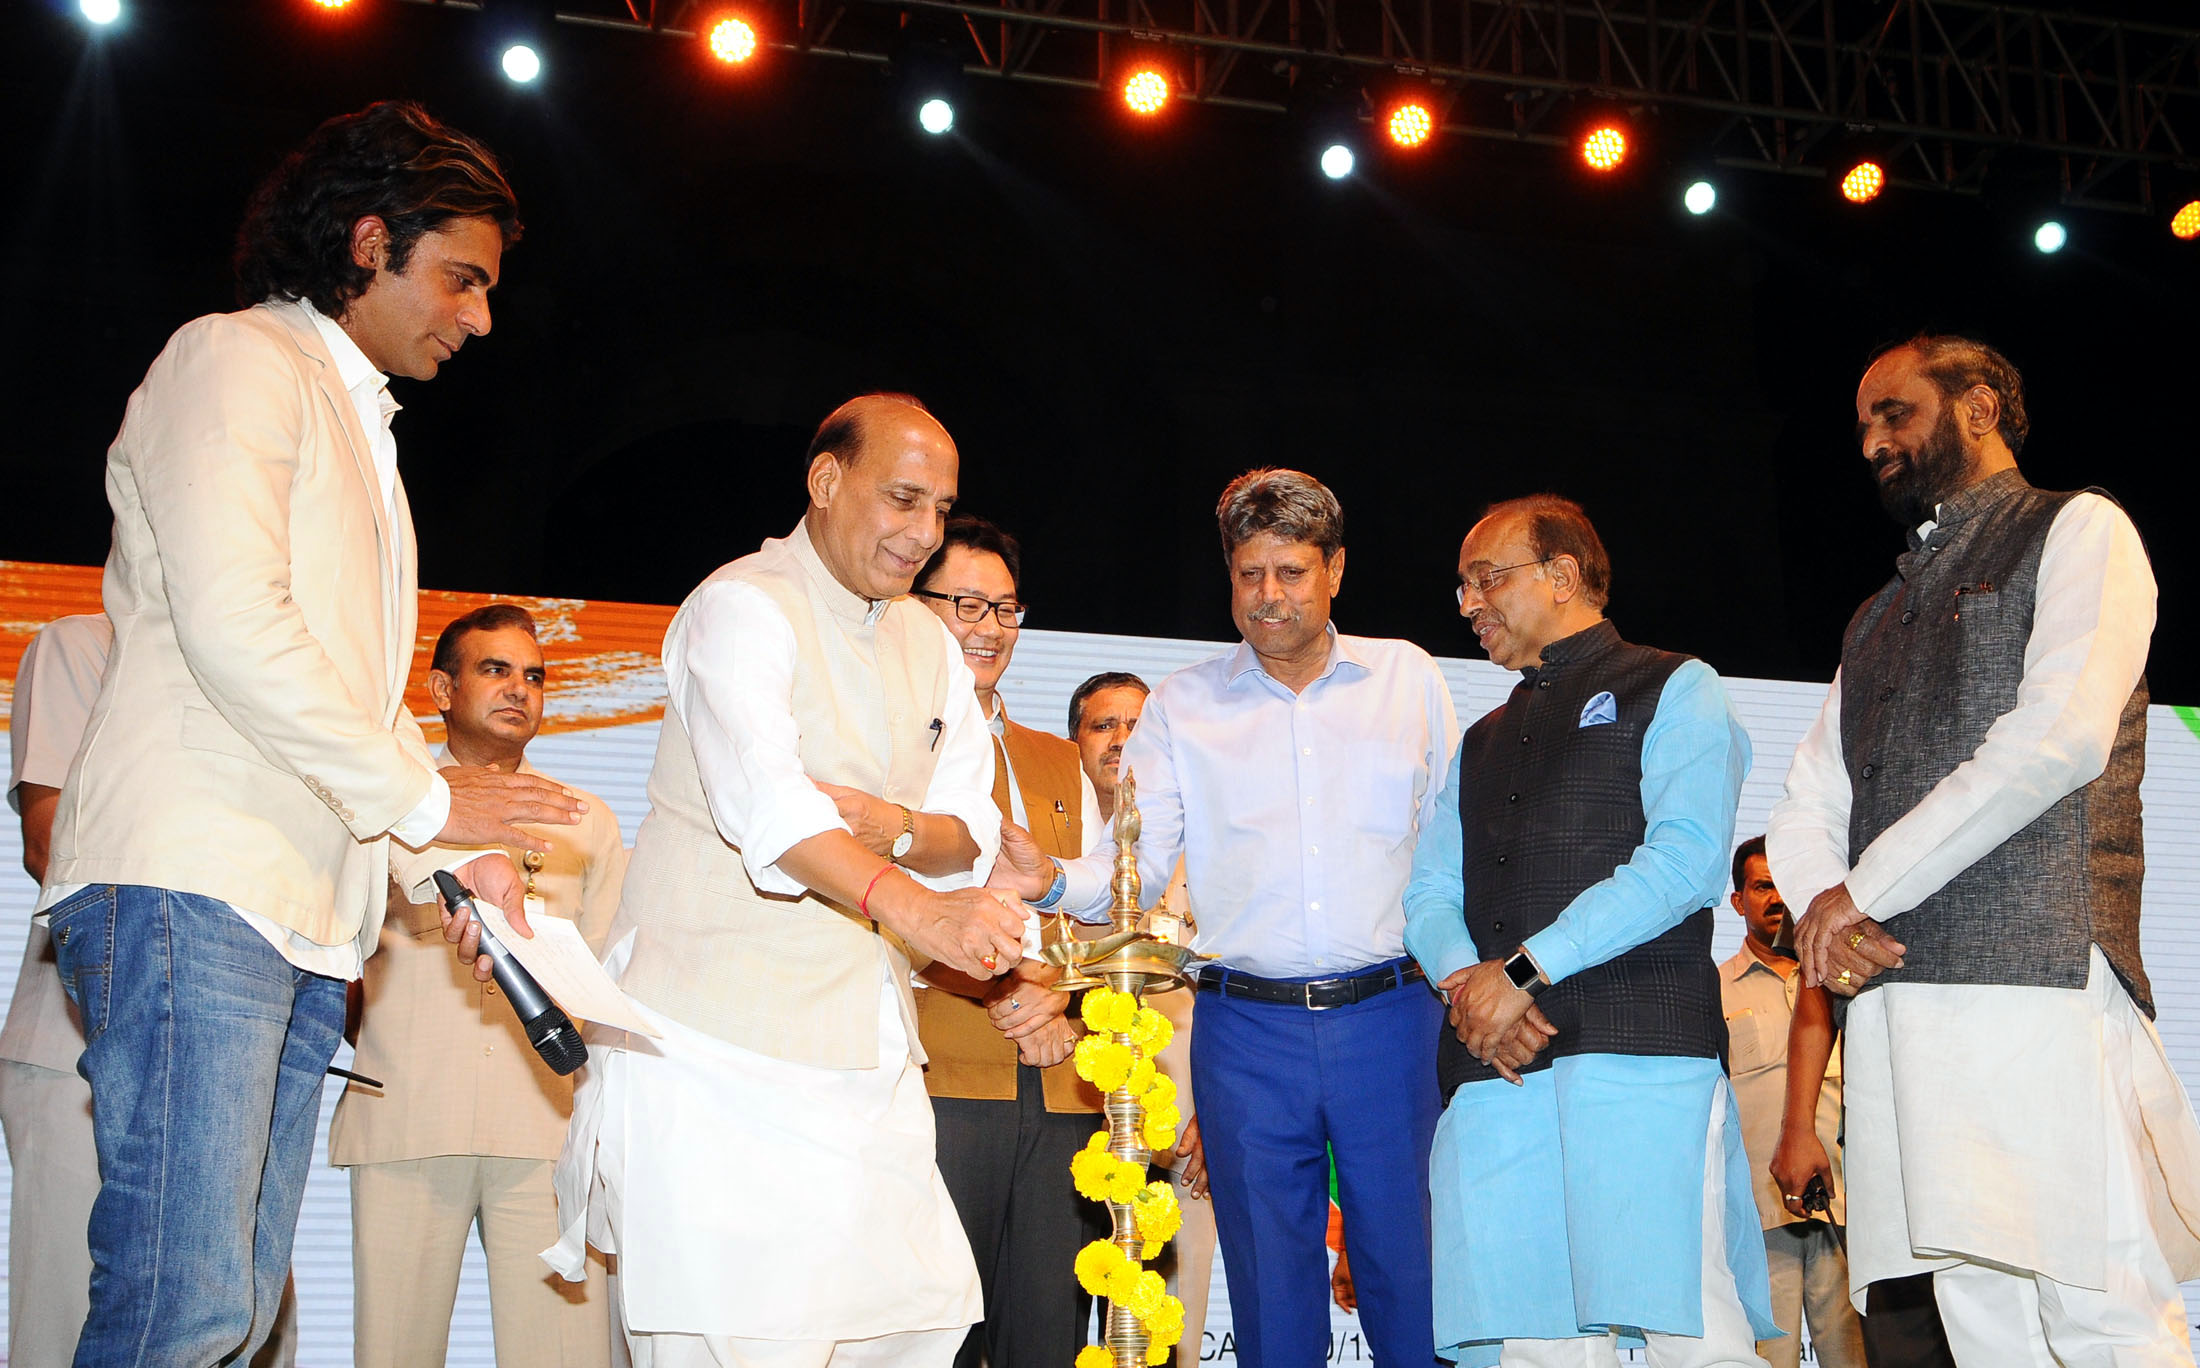 The Union Home Minister, Shri Rajnath Singh lighting the lamp to inaugurate the Curtain Raiser event 'Oorja', a U-19 Football Talent Hunt Tournament , organised by the Central Armed Police Forces and Central Police Organisation, in New Delhi on April 22, 2017.  The Minister of State for Youth Affairs and Sports (I/C), Water Resources, River Development and Ganga Rejuvenation, Shri Vijay Goel, the Minister of State for Home Affairs, Shri Hansraj Gangaram Ahir and Shri Kiren Rijiju and other dignitaries are also seen.